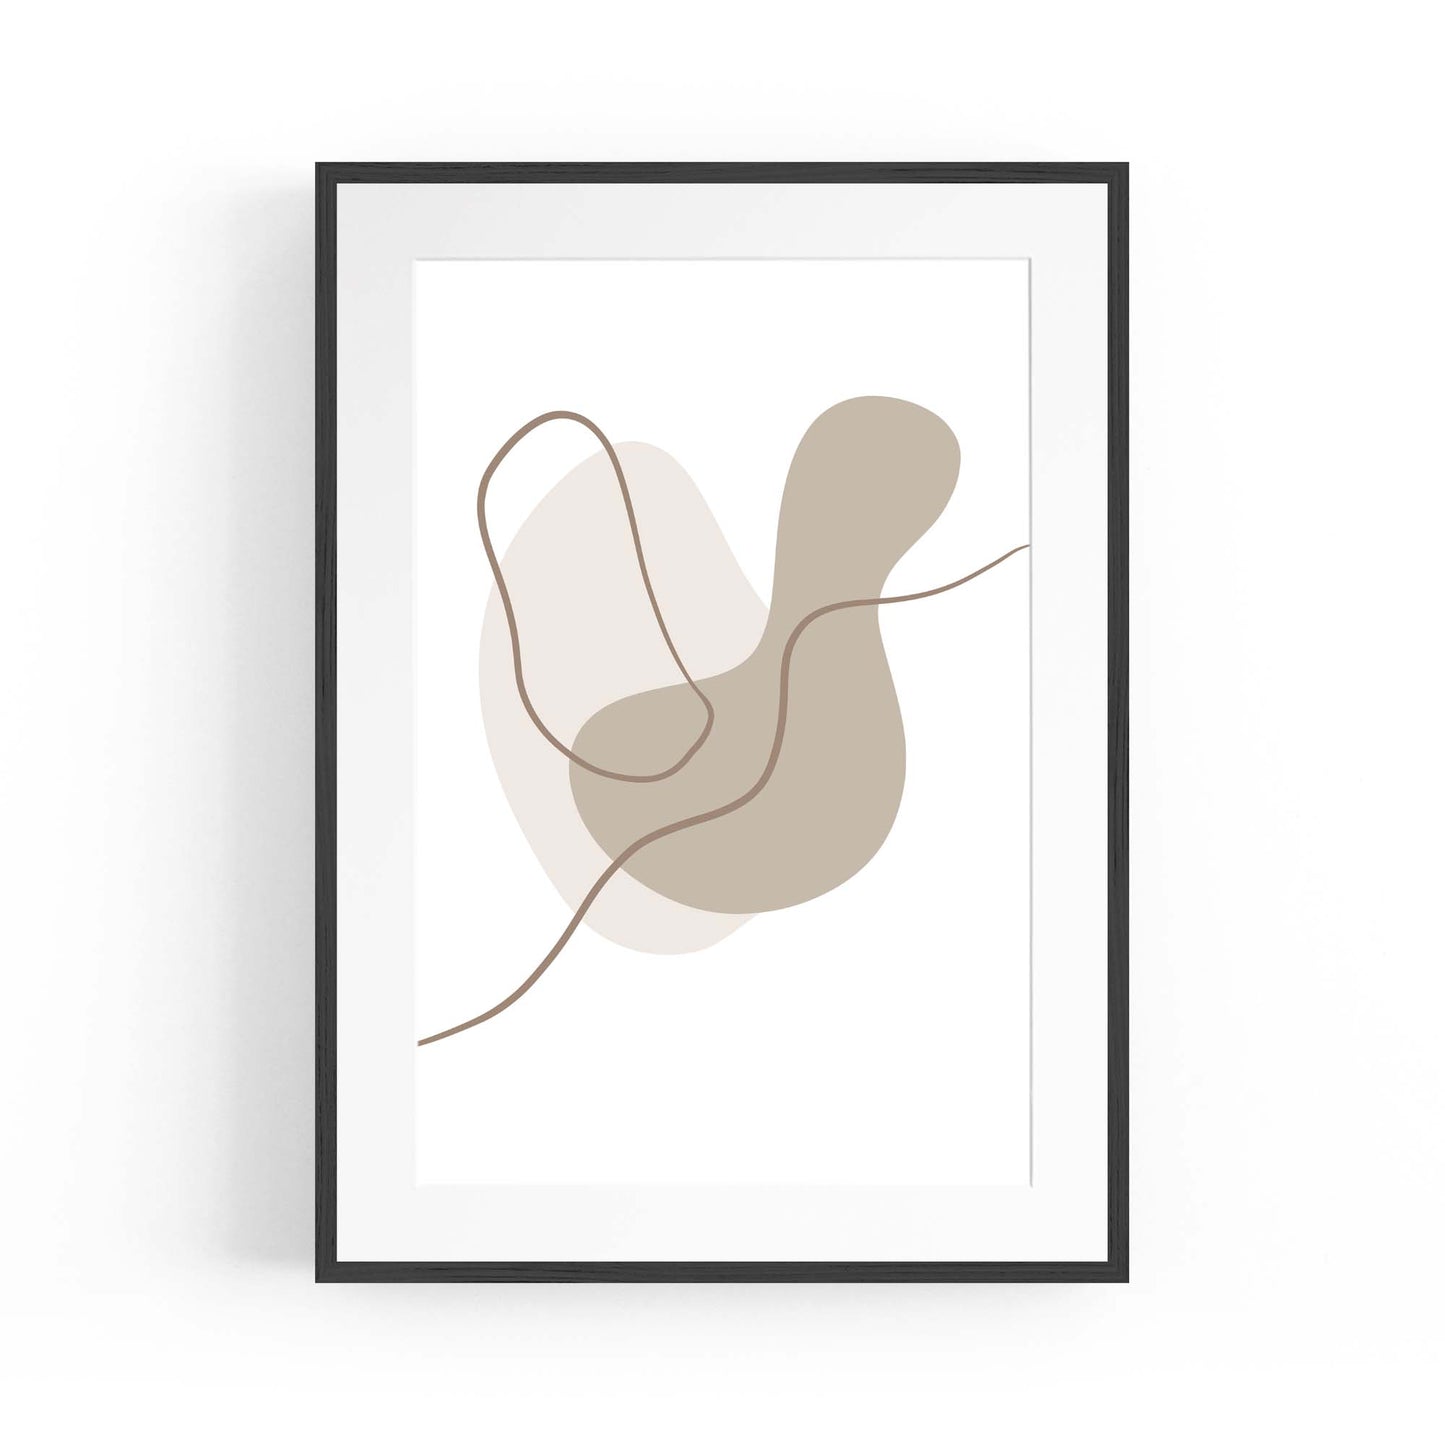 Minimal Black & White Shapes Abstract Wall Art #9 - The Affordable Art Company